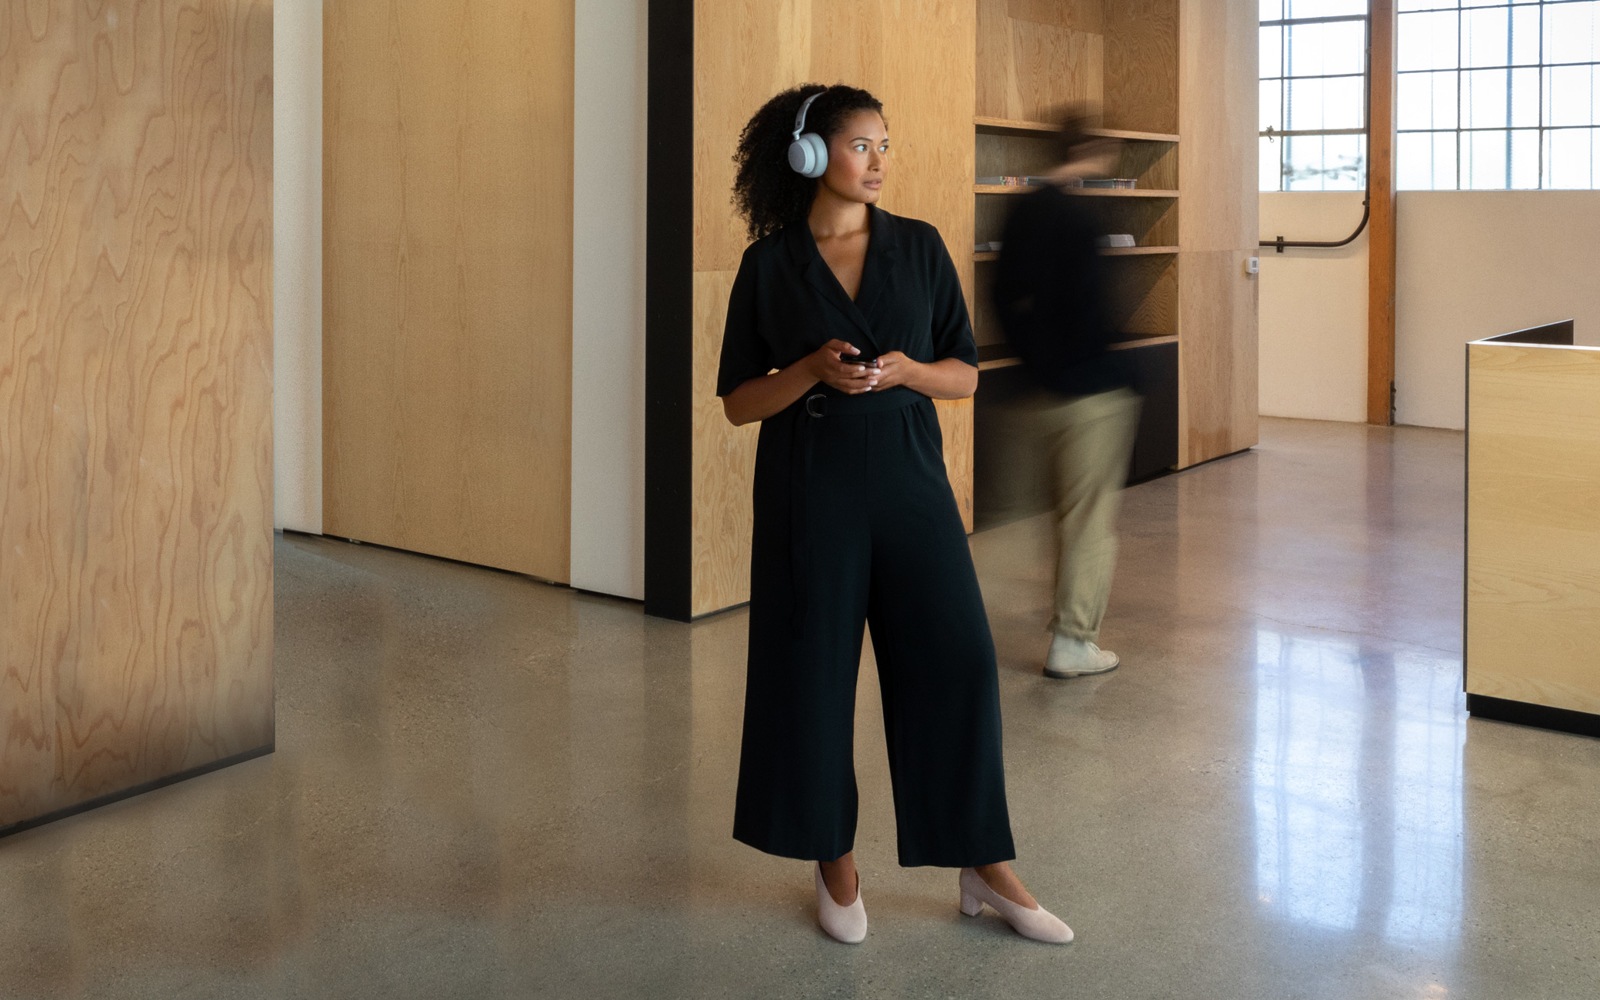 A woman standing with Surface Headphones on her head